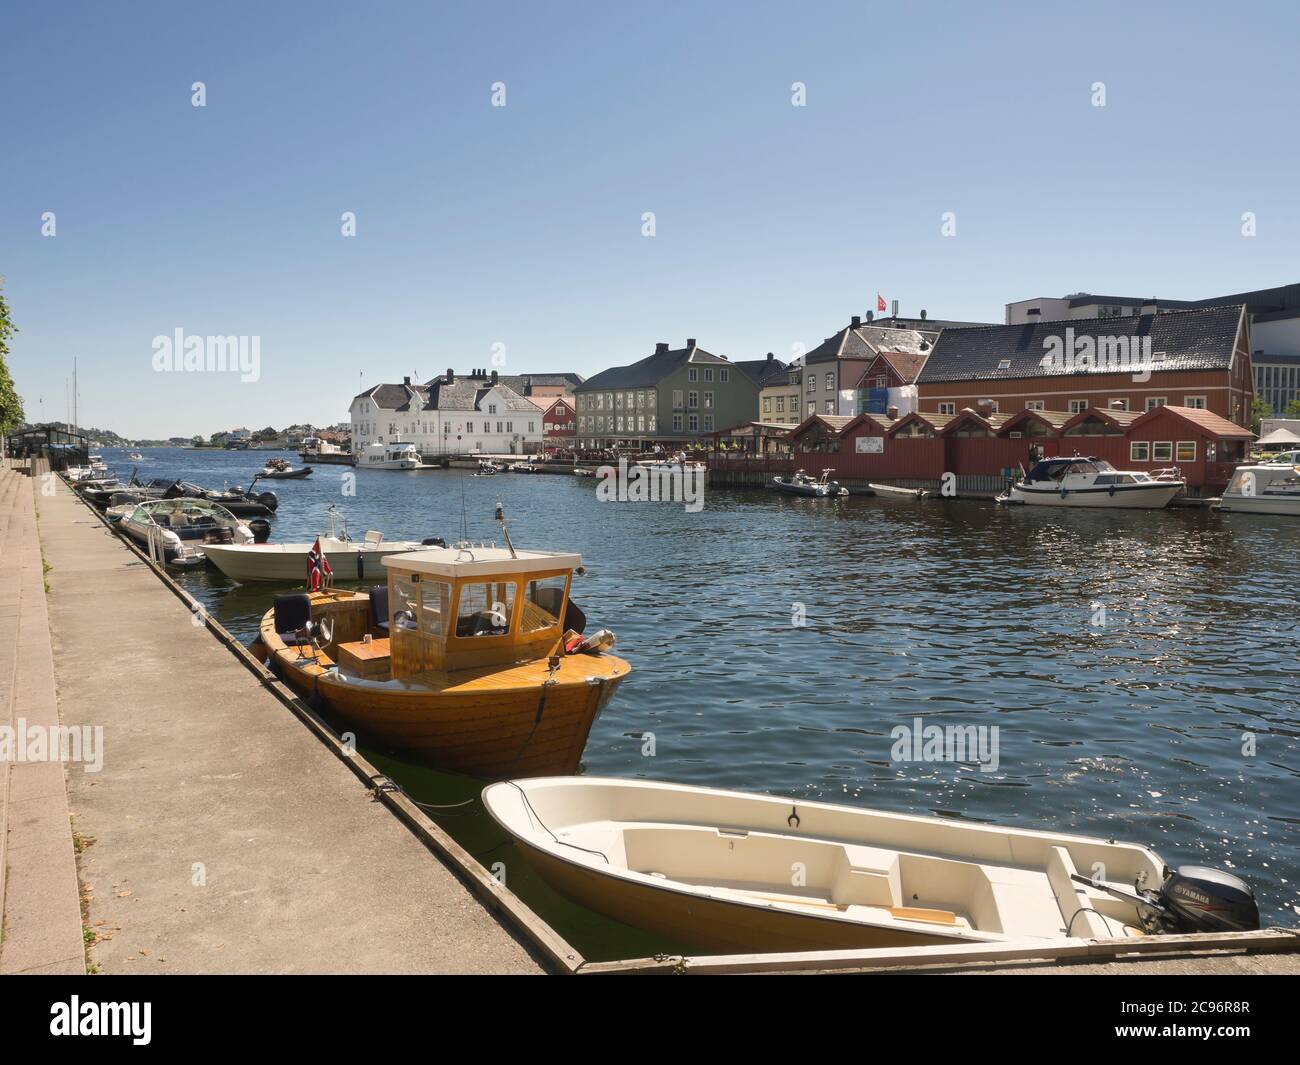 The harbor Pollen in Arendal Norway on a sunny summers day, popular for seafaring visitors with pleasure boats and local ferries Stock Photo